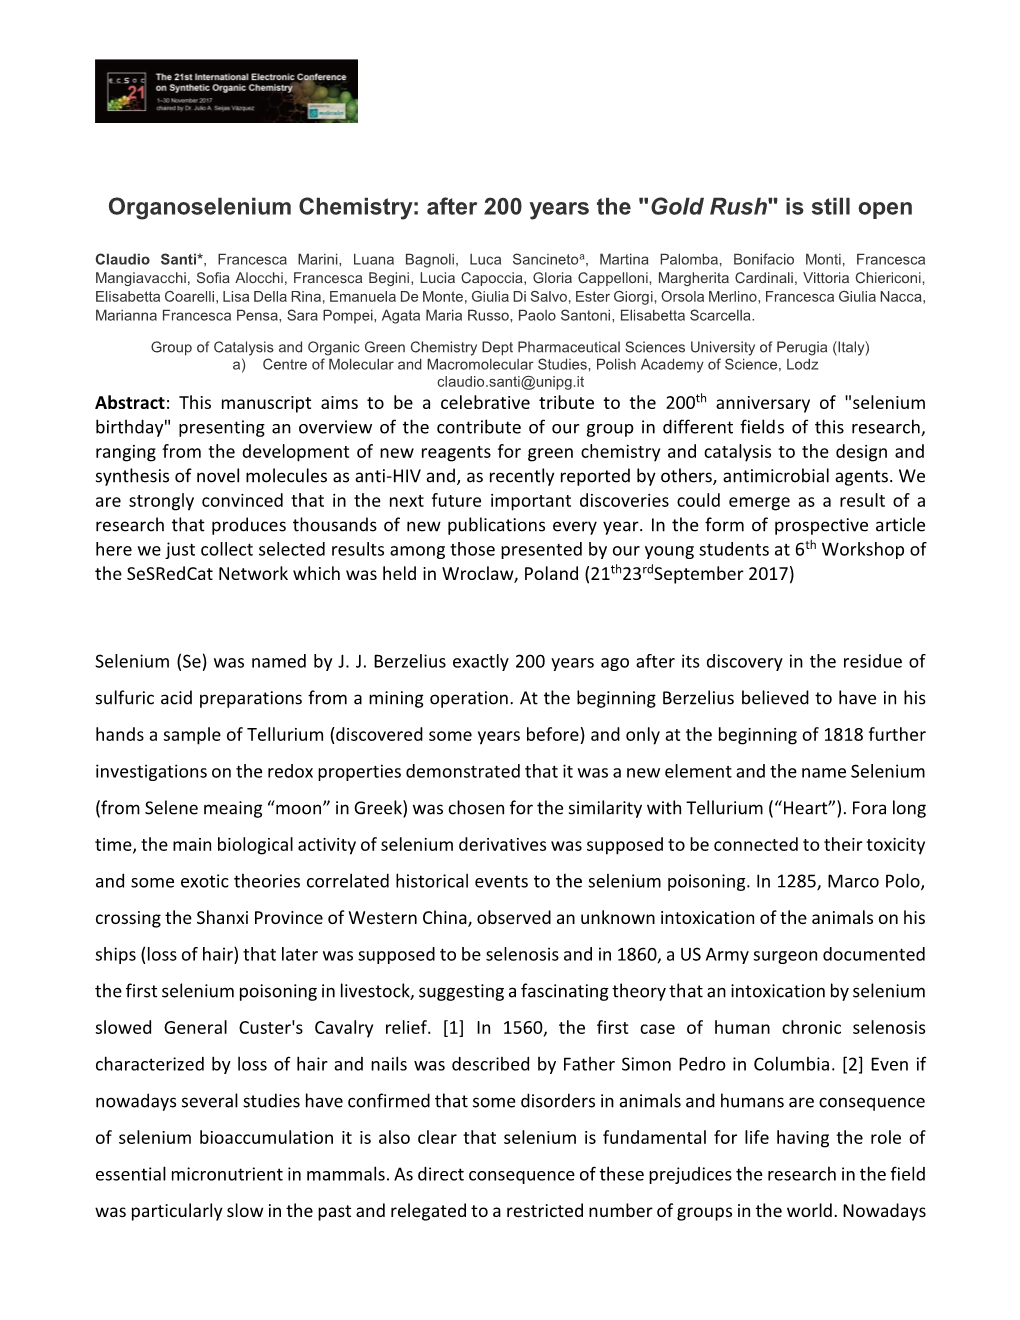 Organoselenium Chemistry: After 200 Years the "Gold Rush" Is Still Open